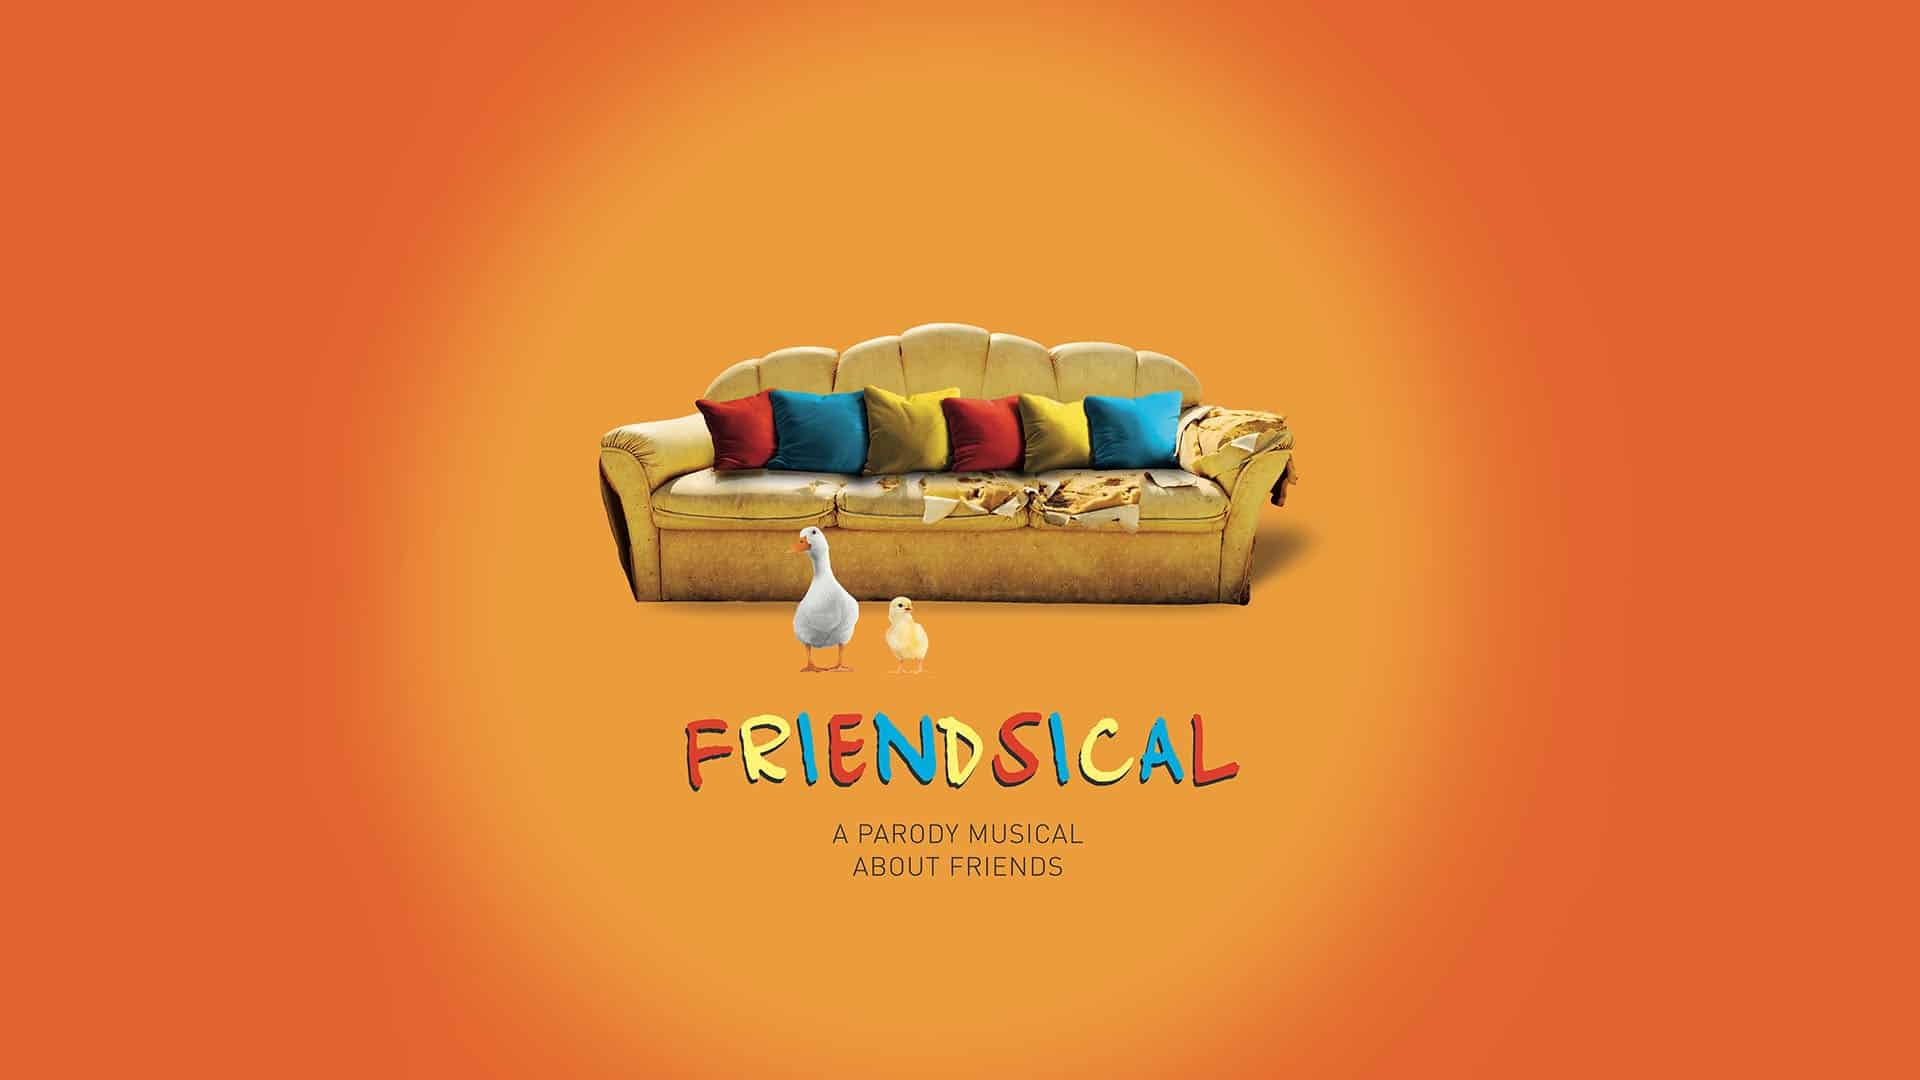 Text: Friendsical, A parody musical about Friends. Image of a tattered sofa with colourful pillows and a duck and chick in front, against a bright orange background